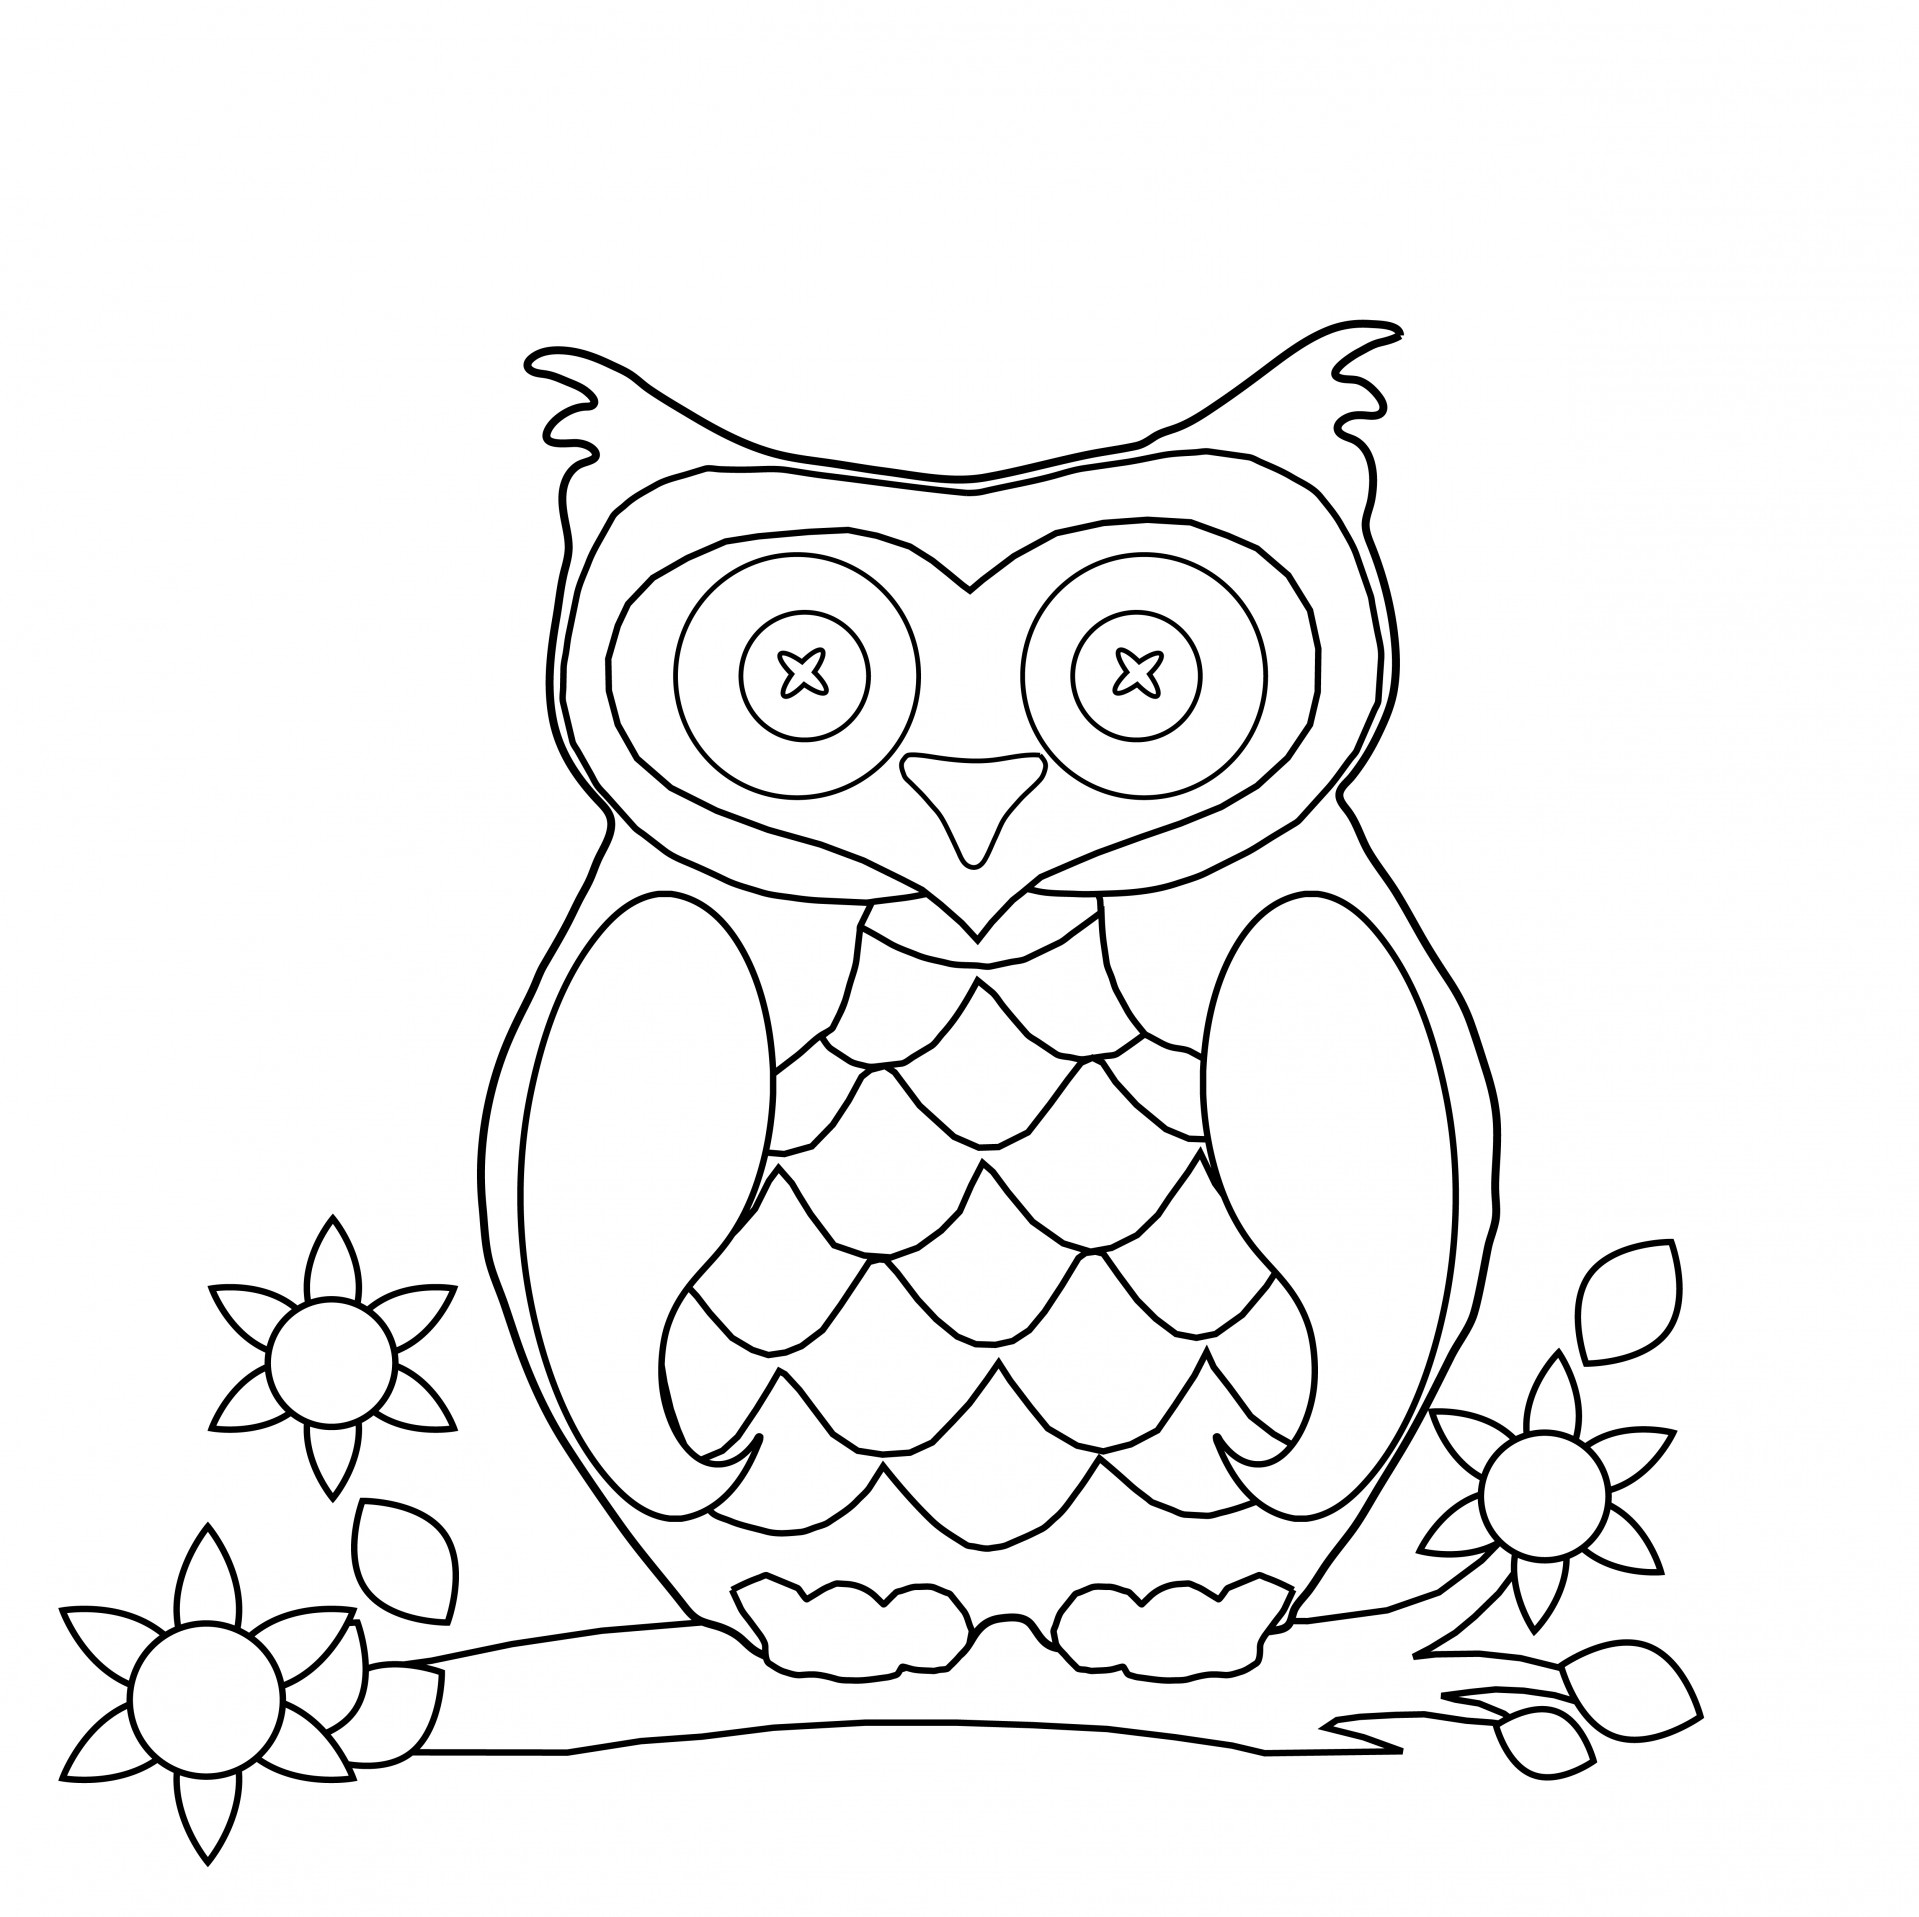 Owl Coloring Page Clipart Free Stock Photo - Public Domain Pictures